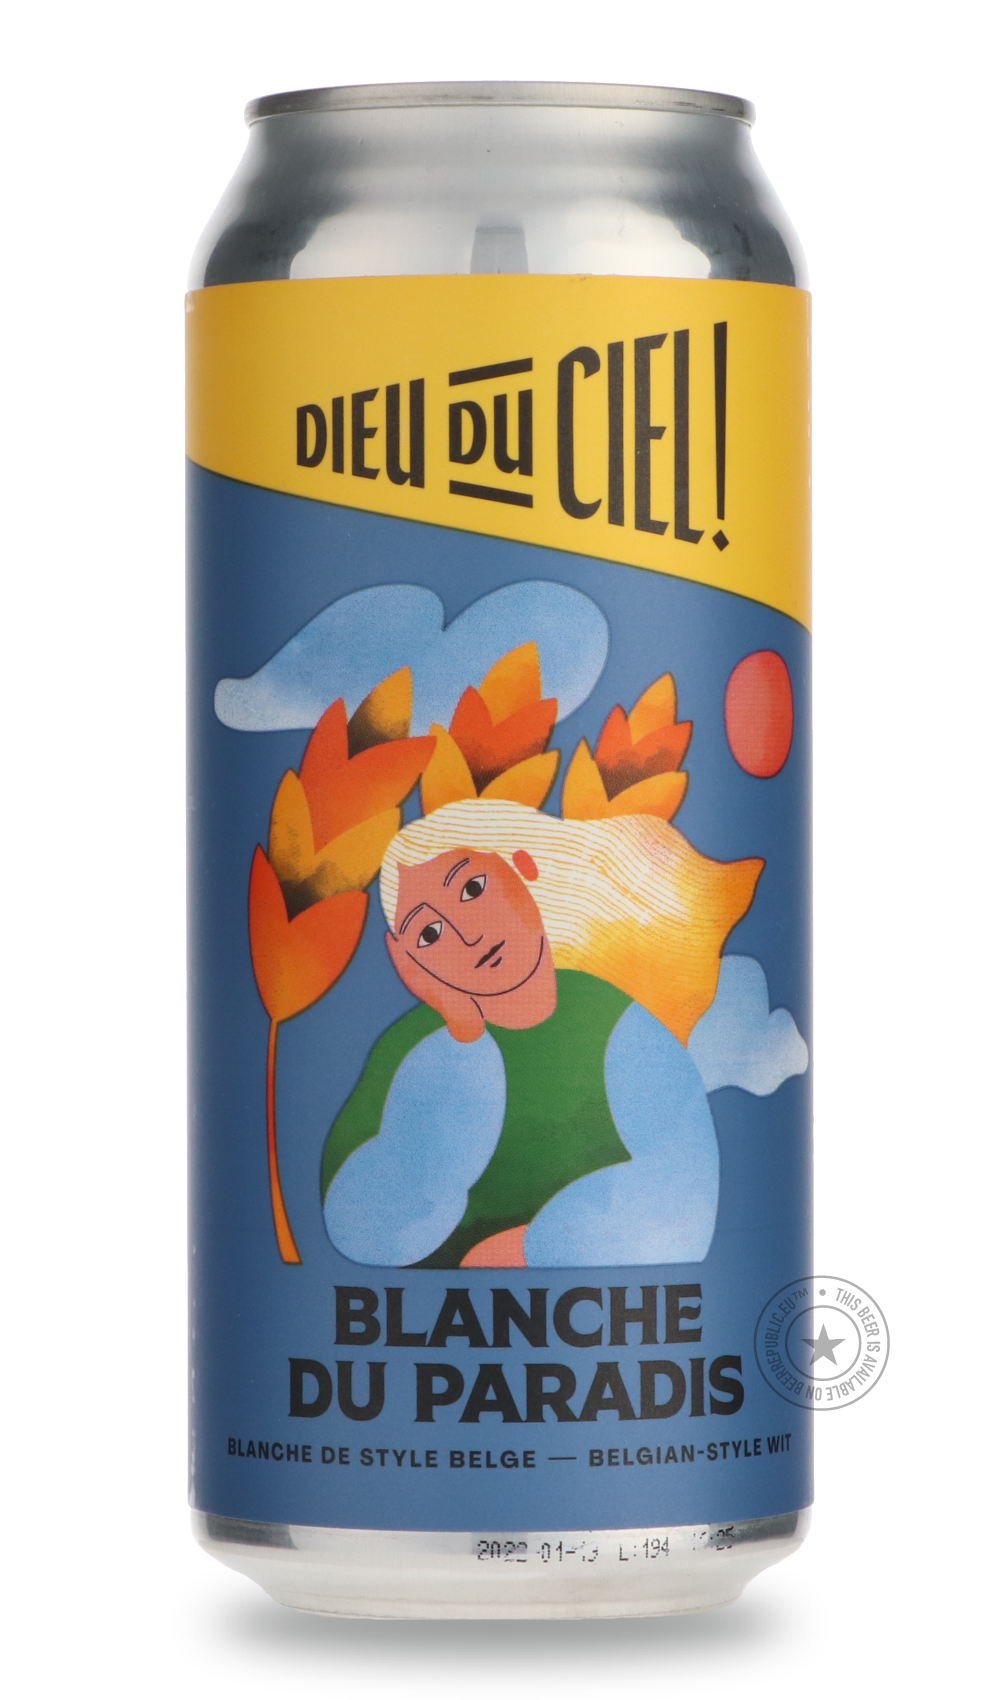 -Dieu du Ciel- Blanche du Paradis-Pale- Only @ Beer Republic - The best online beer store for American & Canadian craft beer - Buy beer online from the USA and Canada - Bier online kopen - Amerikaans bier kopen - Craft beer store - Craft beer kopen - Amerikanisch bier kaufen - Bier online kaufen - Acheter biere online - IPA - Stout - Porter - New England IPA - Hazy IPA - Imperial Stout - Barrel Aged - Barrel Aged Imperial Stout - Brown - Dark beer - Blond - Blonde - Pilsner - Lager - Wheat - Weizen - Amber 